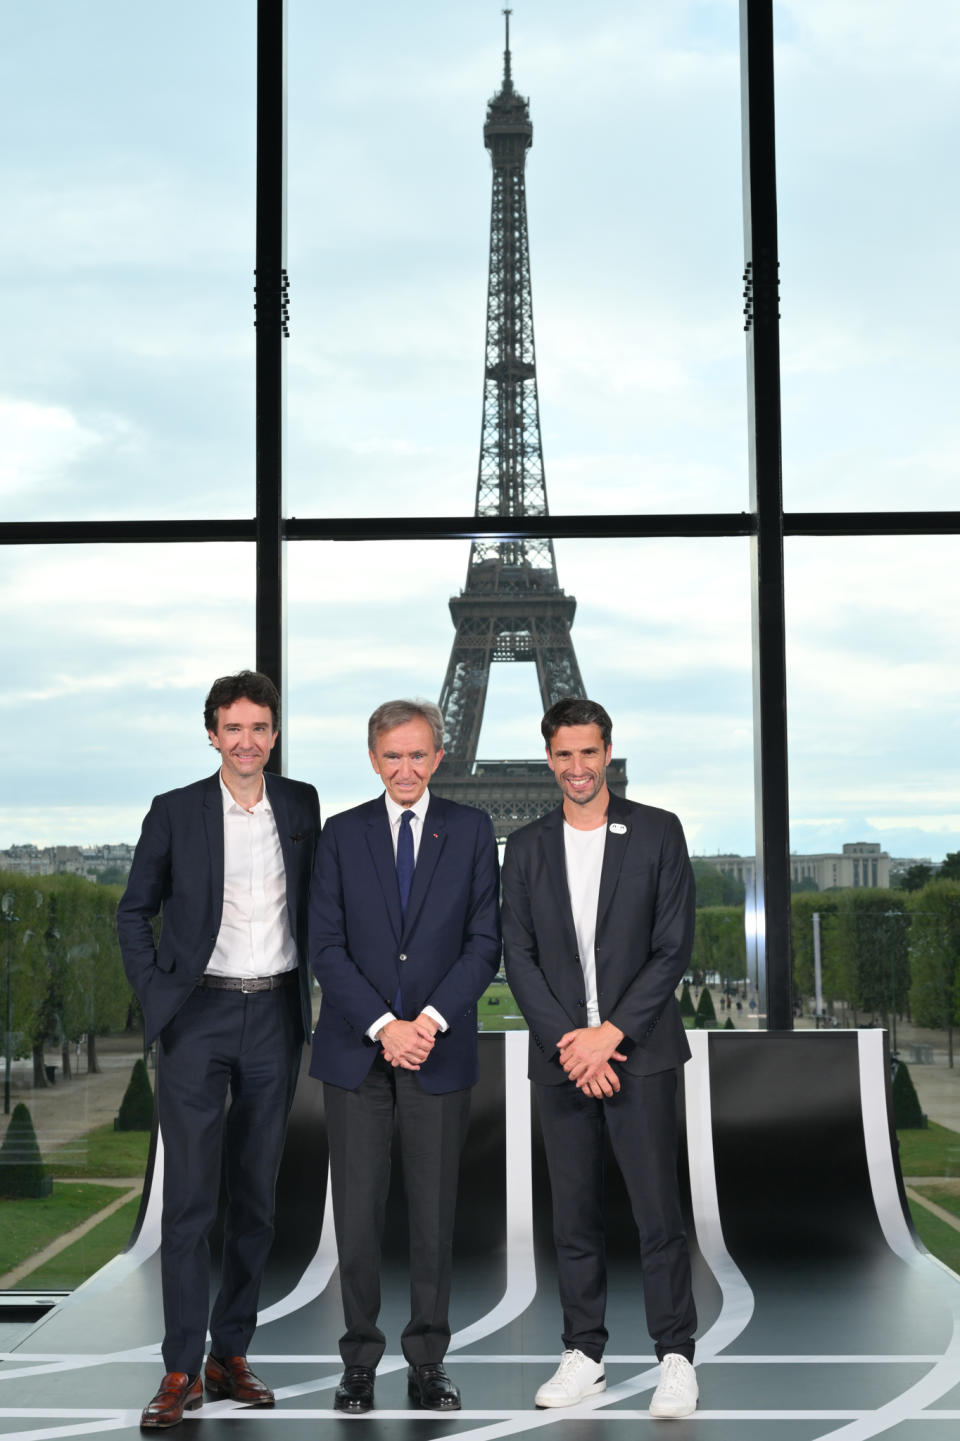 Antoine Arnault, head of communication, image and environment at LVMH, Bernard Arnault, chairman and chief executive officer of LVMH, and Tony Estanguet, president of the Paris 2024 Organizing Committee for the Olympic and Paralympic Games.